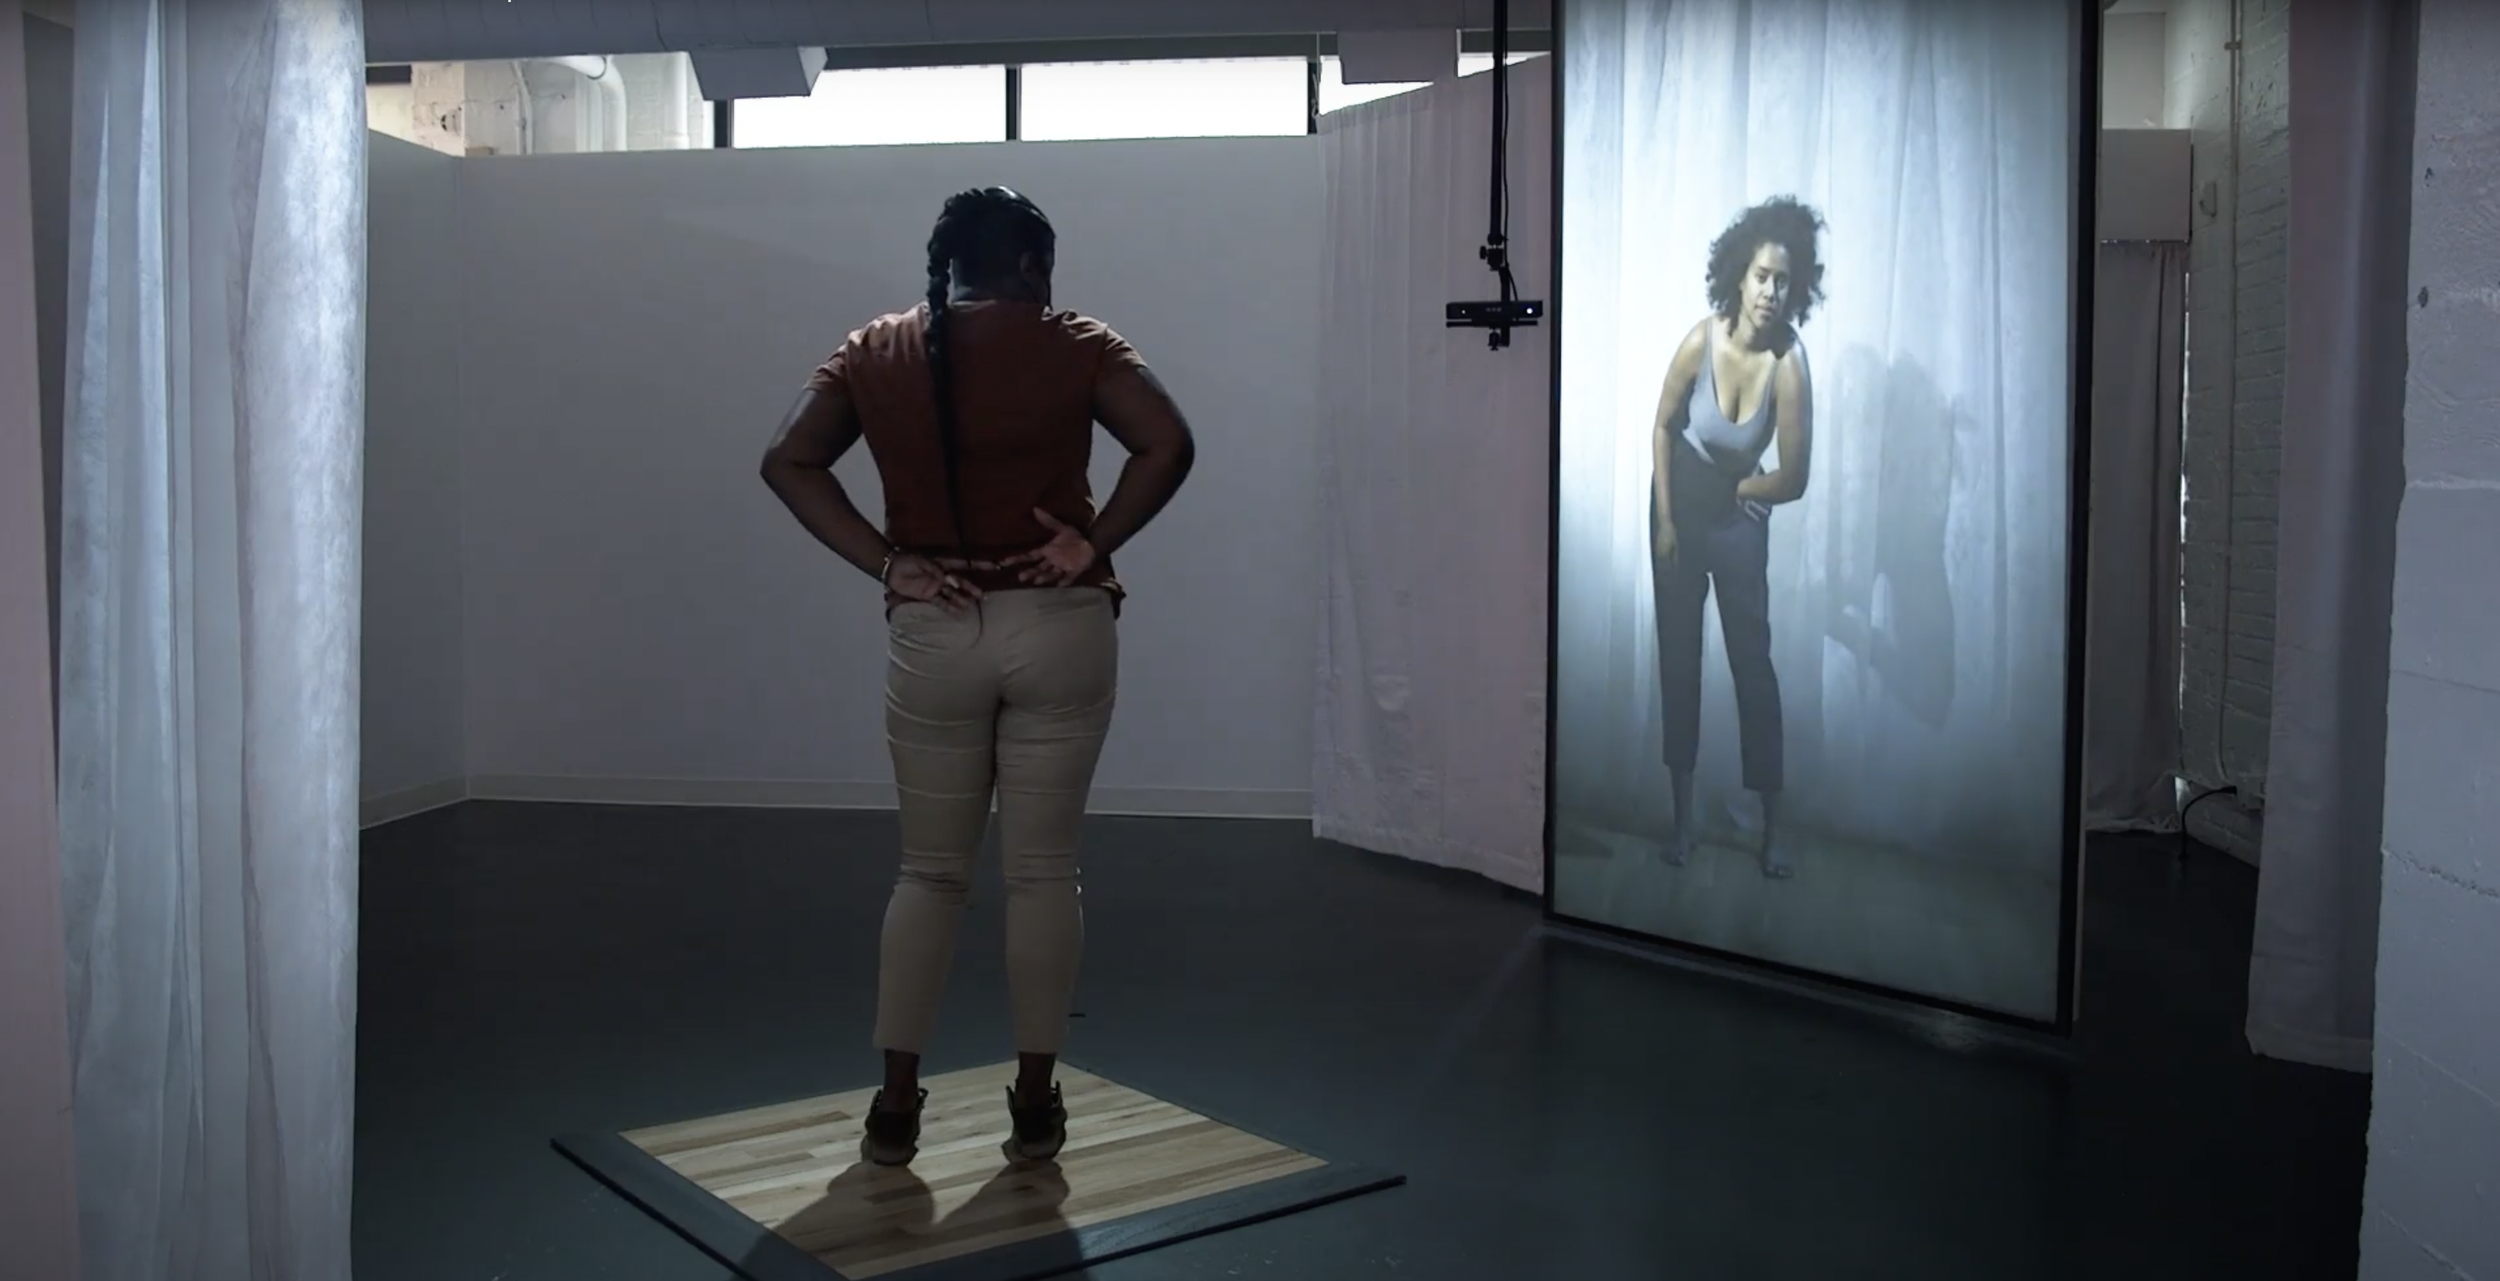 A person stands on a platform and interacts with a video (a performer gesturing in front of a white curtain) inside The Wndr Museum.